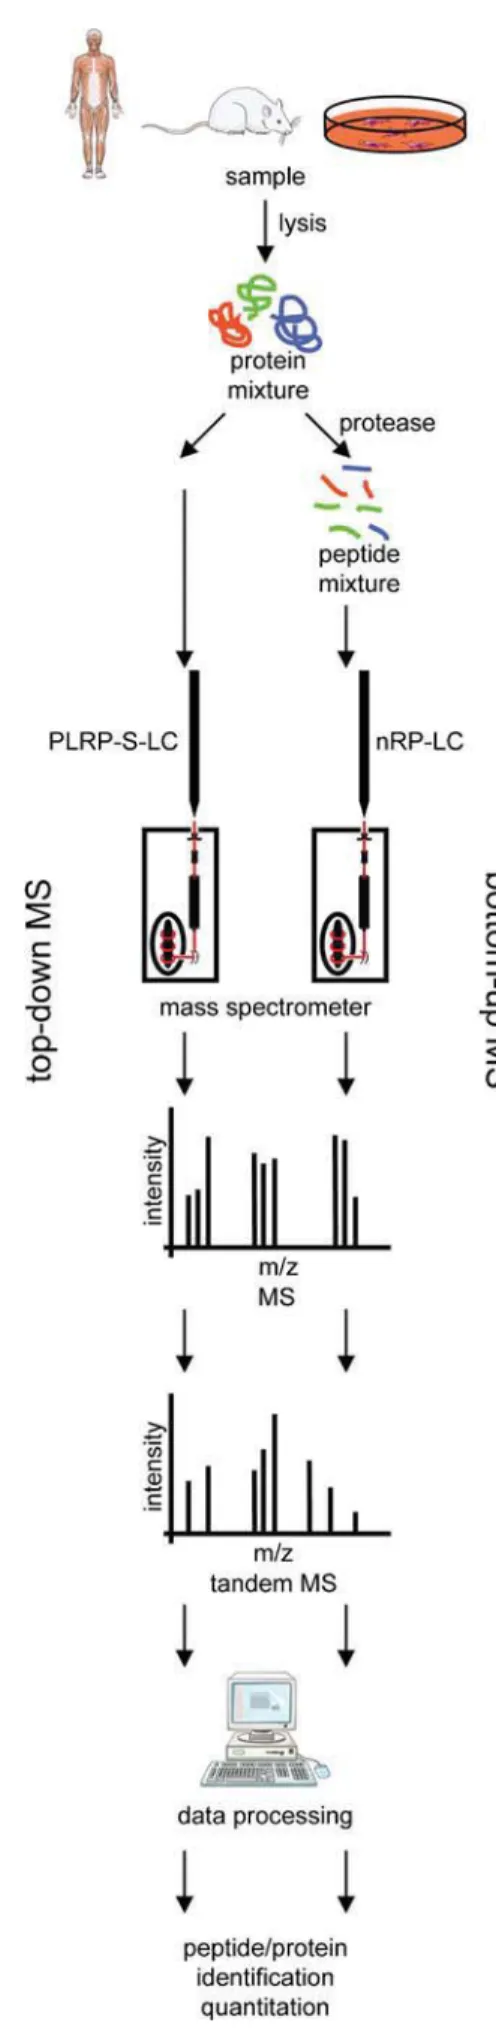 Fig. 1 Mass spectrometry (MS)-based proteomic workflows. MS is employed to study proteins and peptides